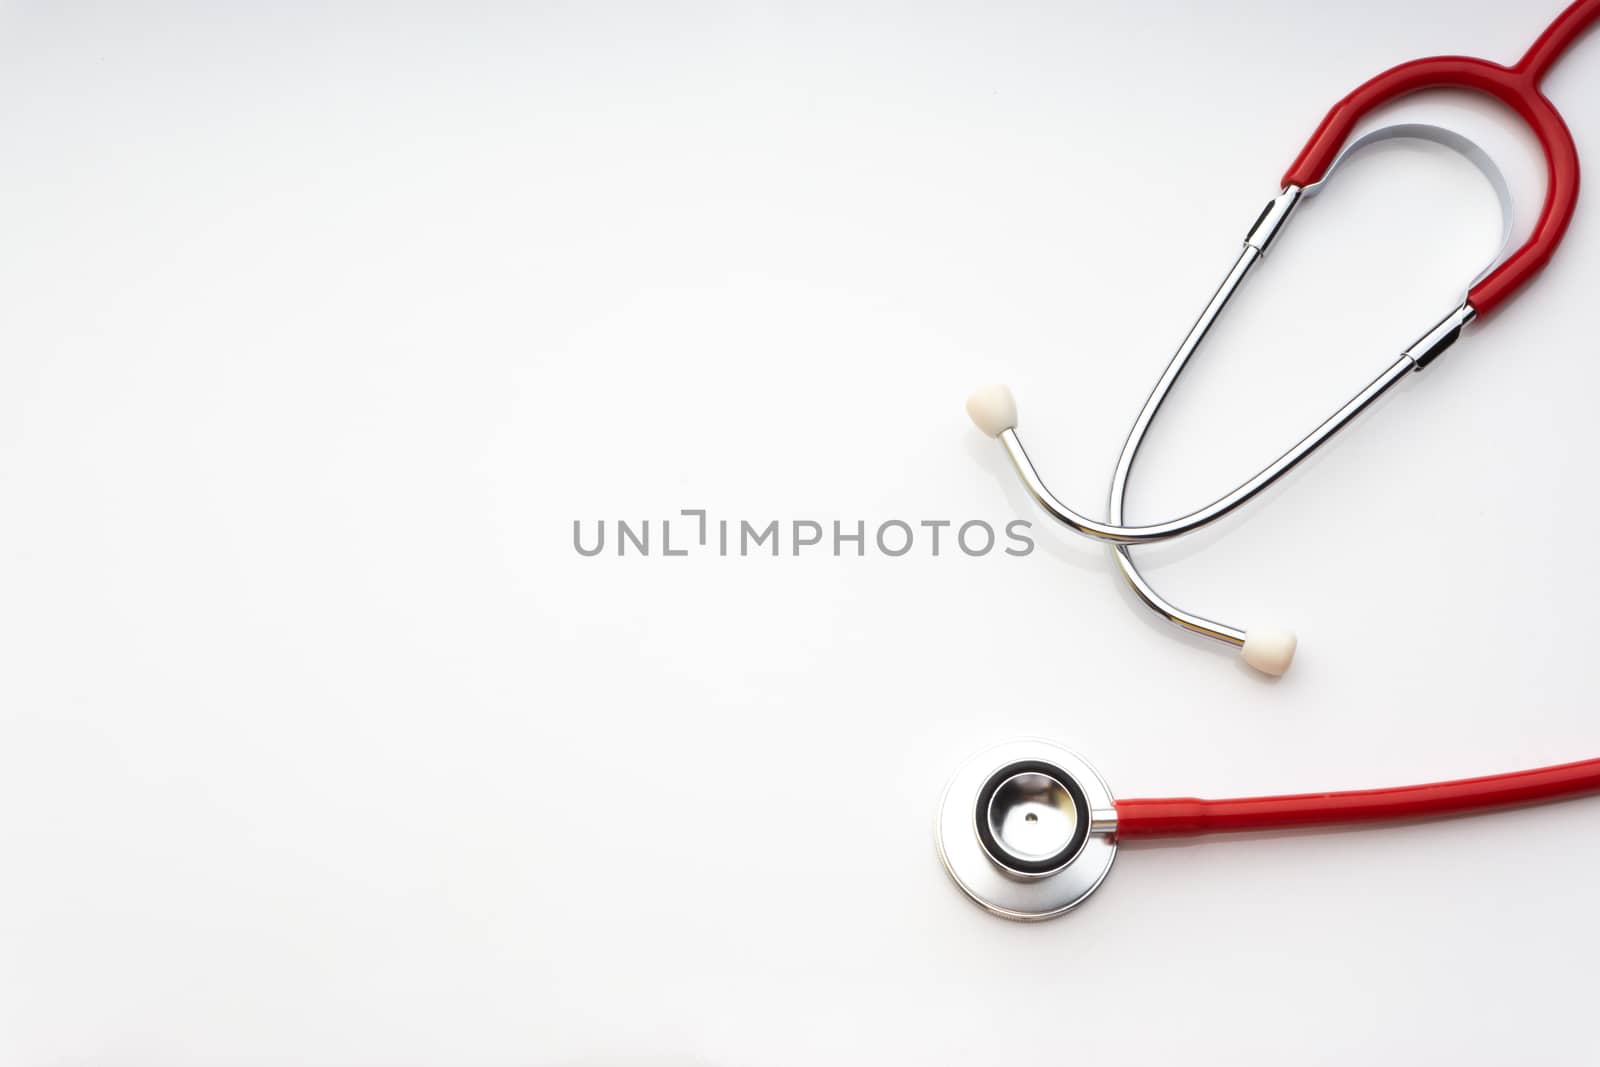 Stethoscope on white background by silverwings